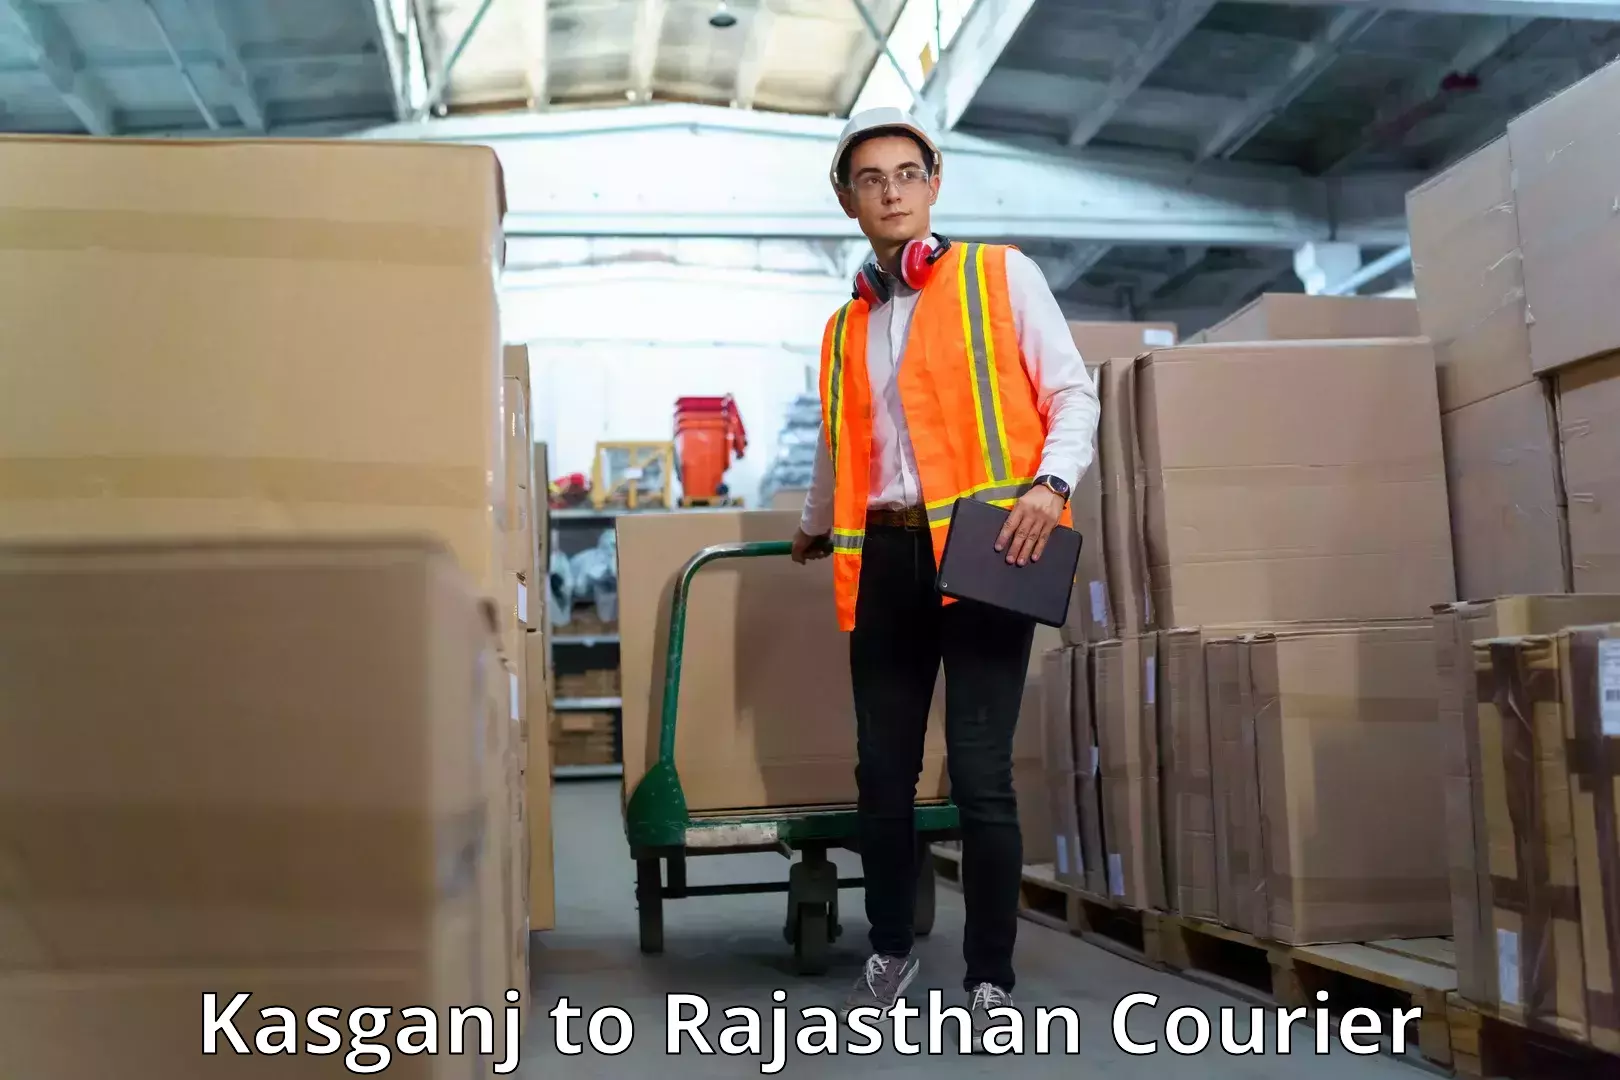 Quality courier partnerships in Kasganj to Jaipur